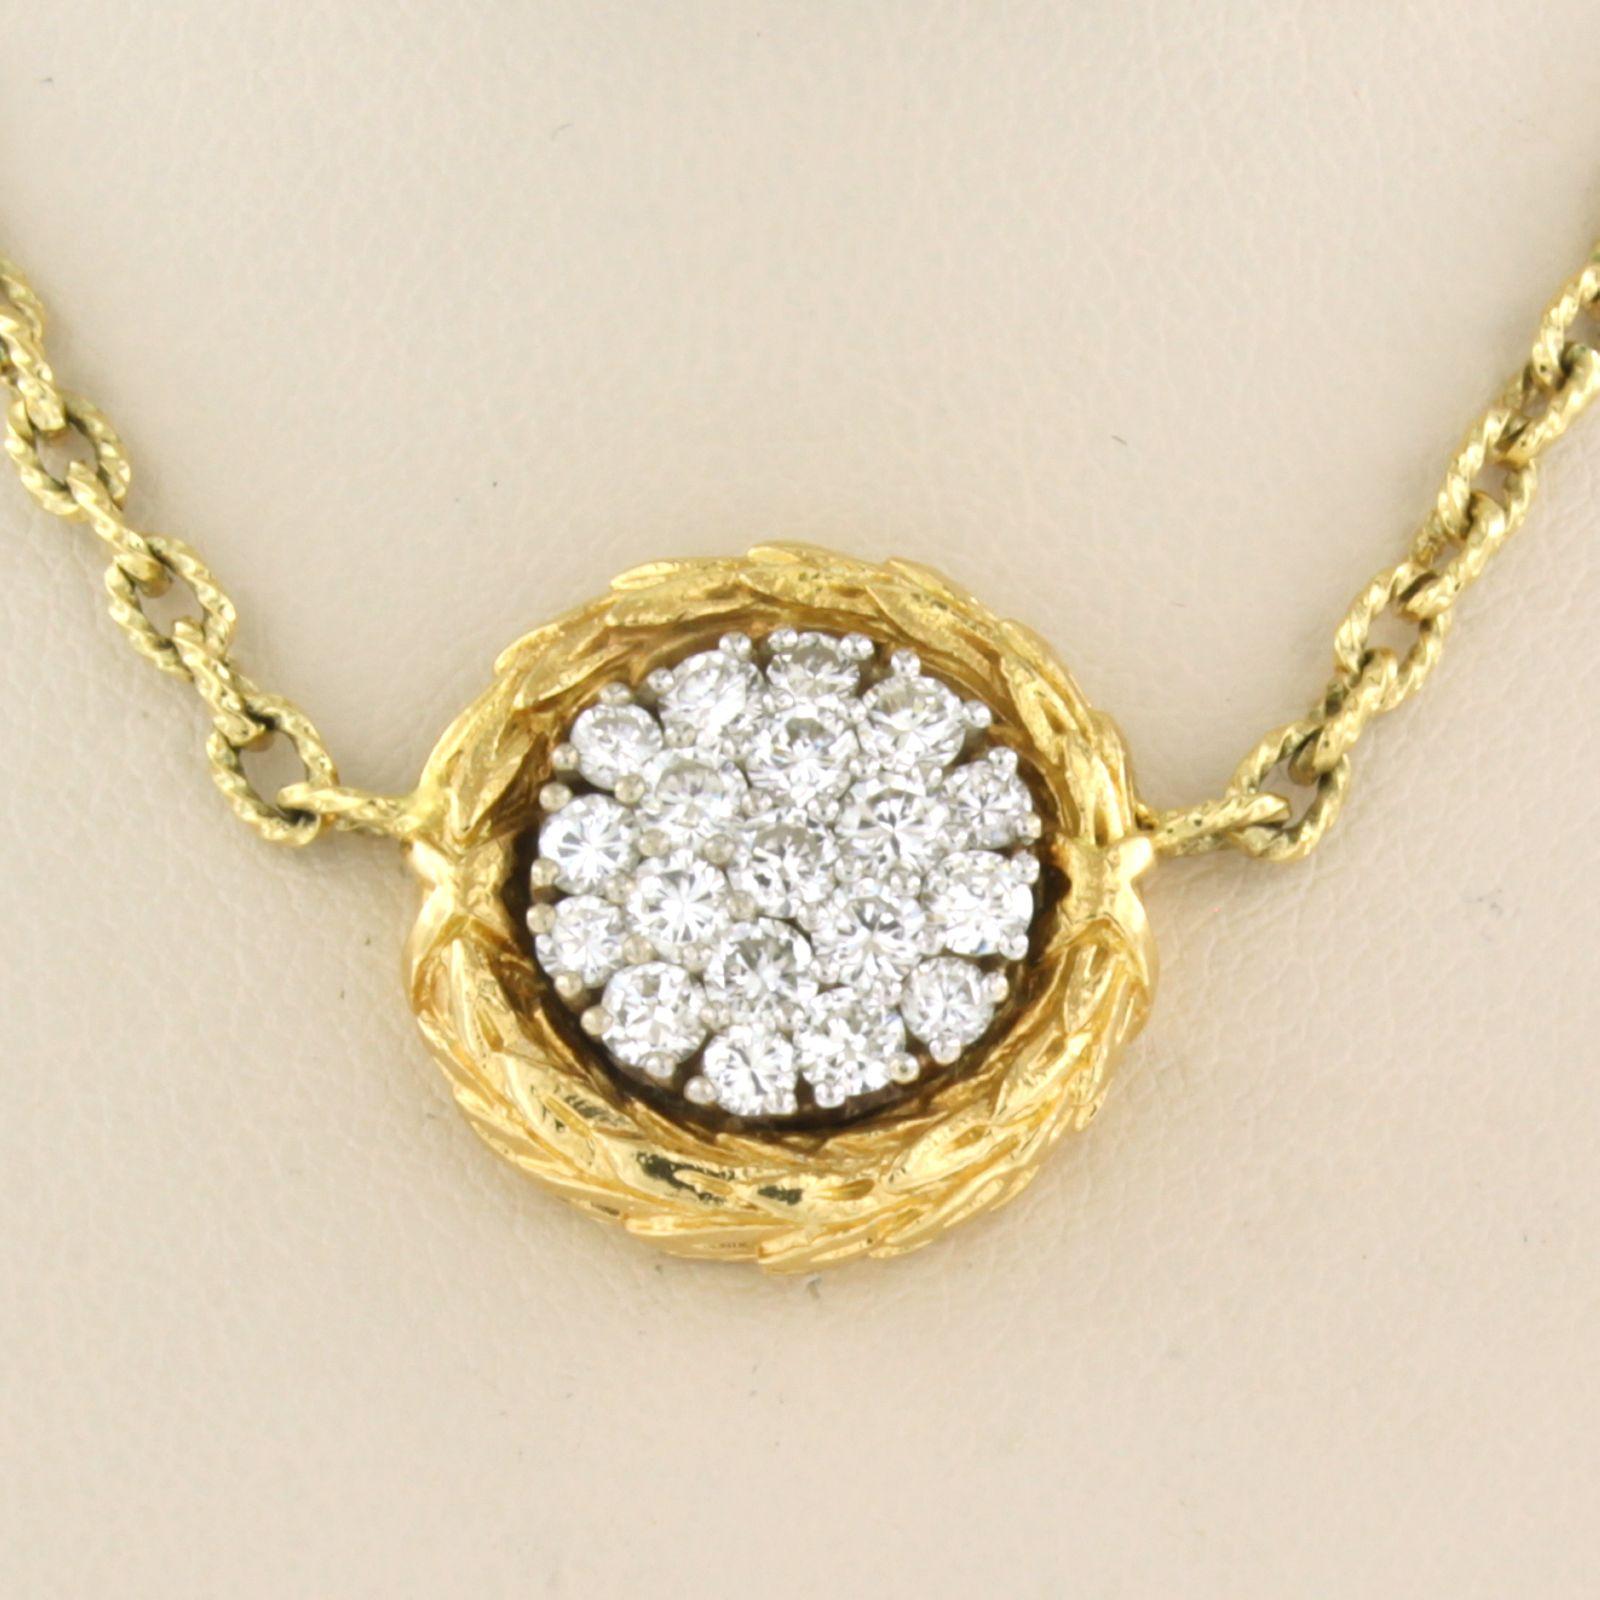 18k yellow gold necklace with bicolour gold fixed pendant set with brilliant cut diamonds total approx. 0.90 ct - F/G - VS/SI - 39 cm long

detailed description

the necklace is about 2 x 18.5 cm. Total length with pendant 39 cm

the pendant has a